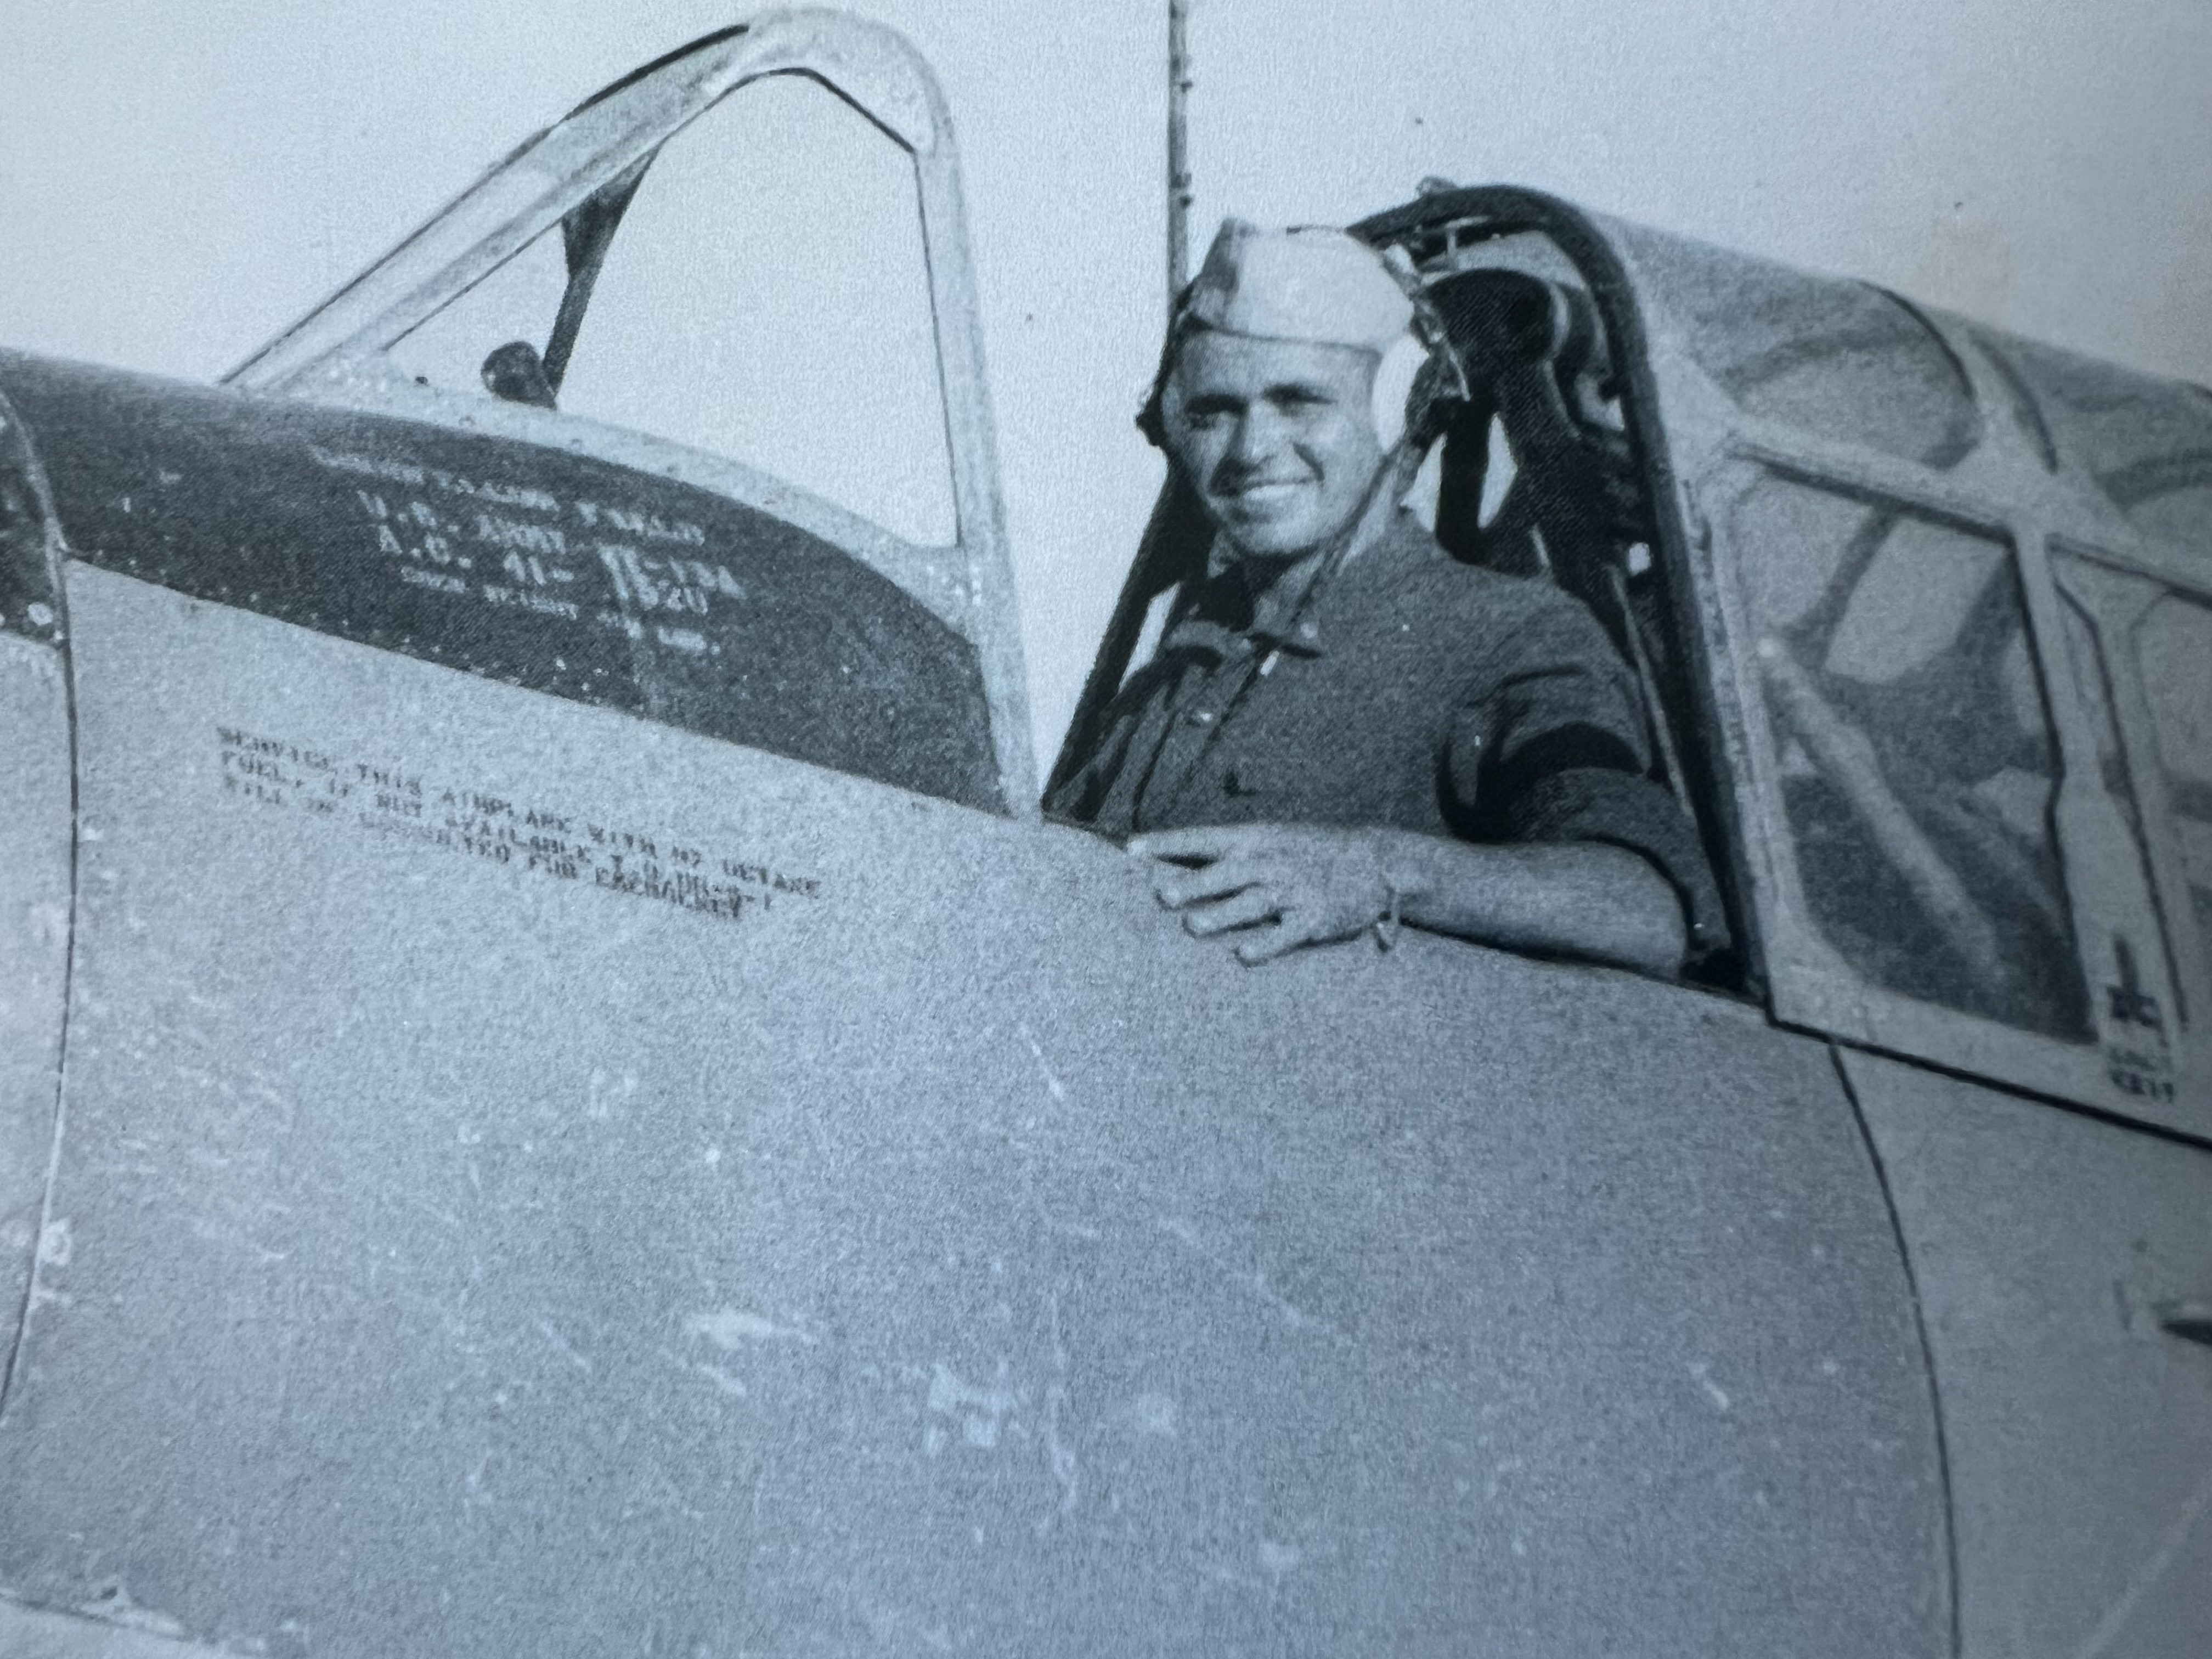 A black and white photo of Daniel Eyles in the flight deck of a plane.